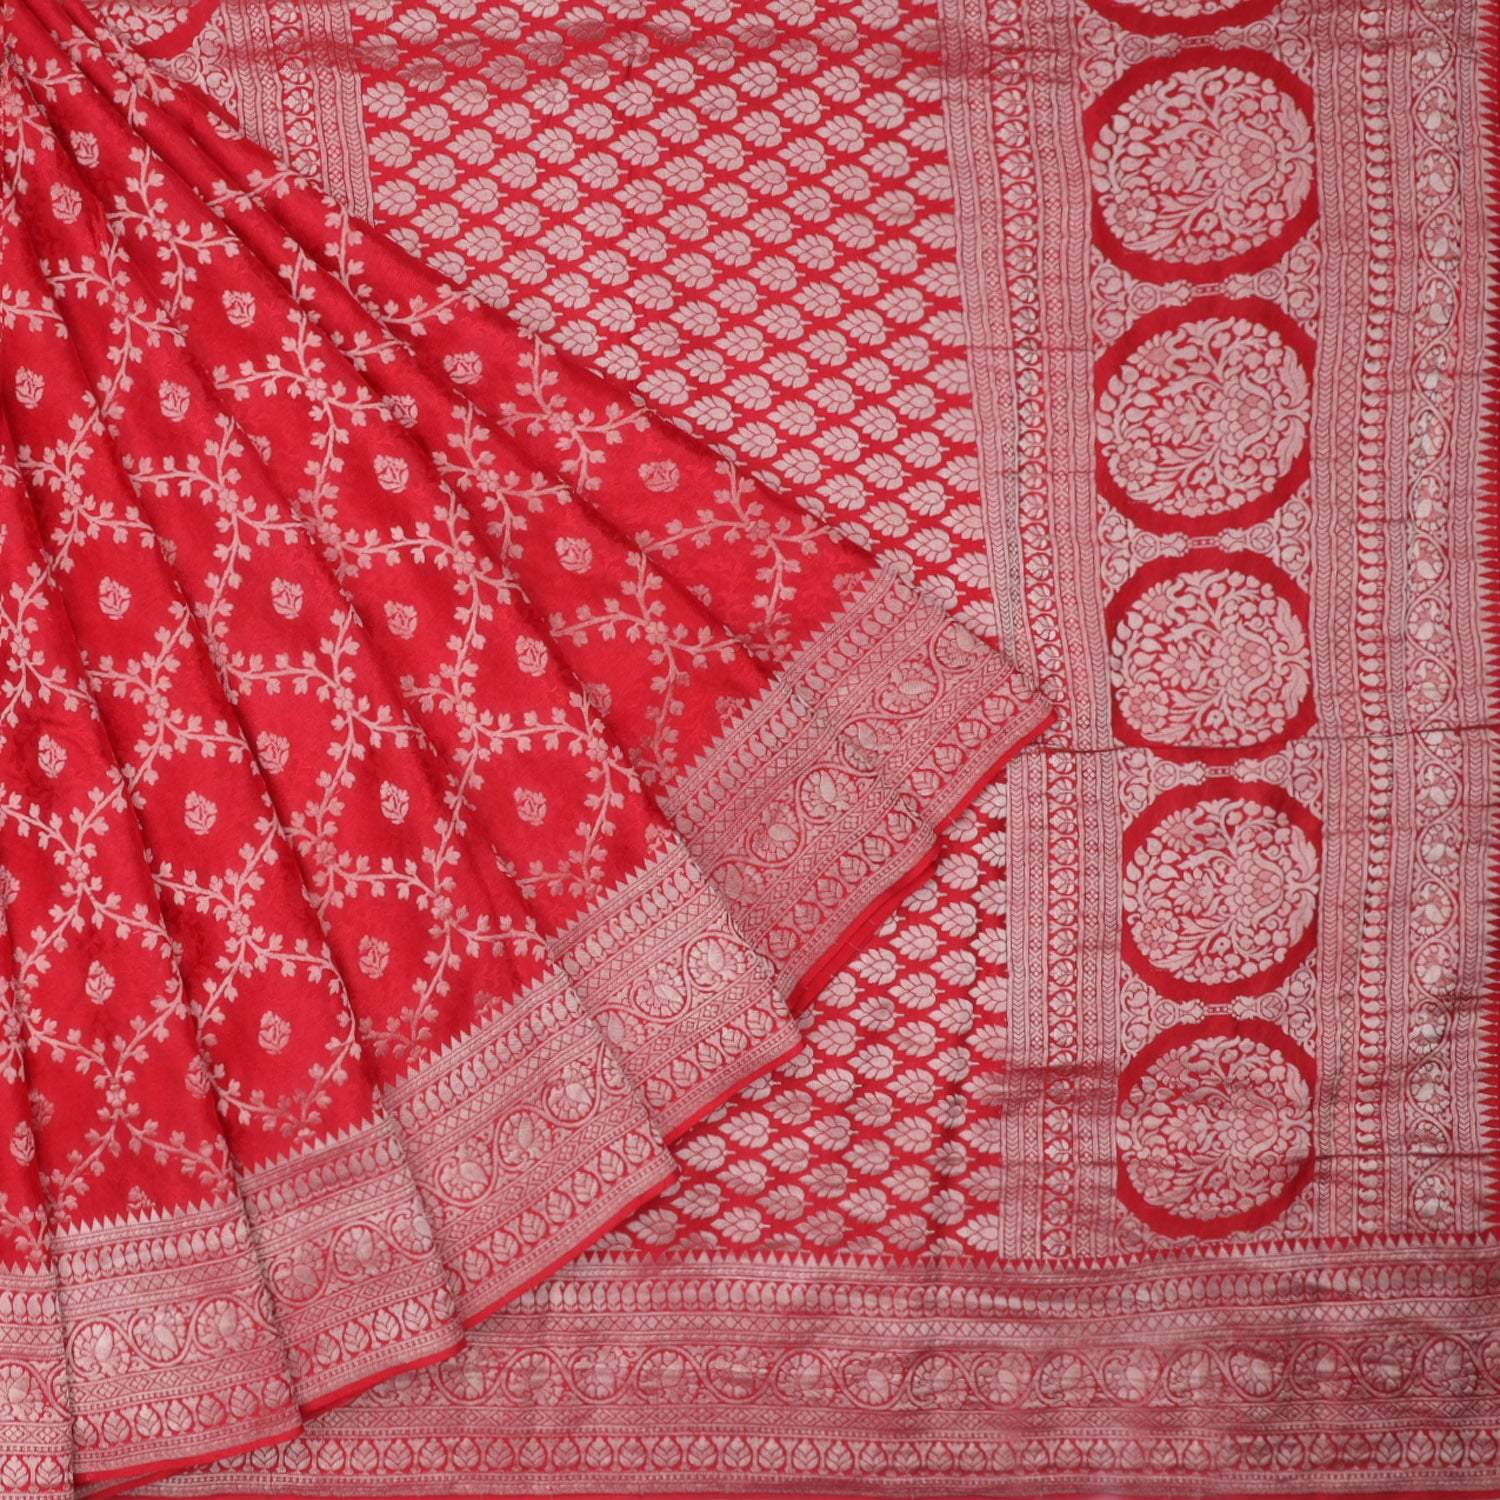 Red Banarasi Silk Saree With Floral Jaal Pattern - Singhania's